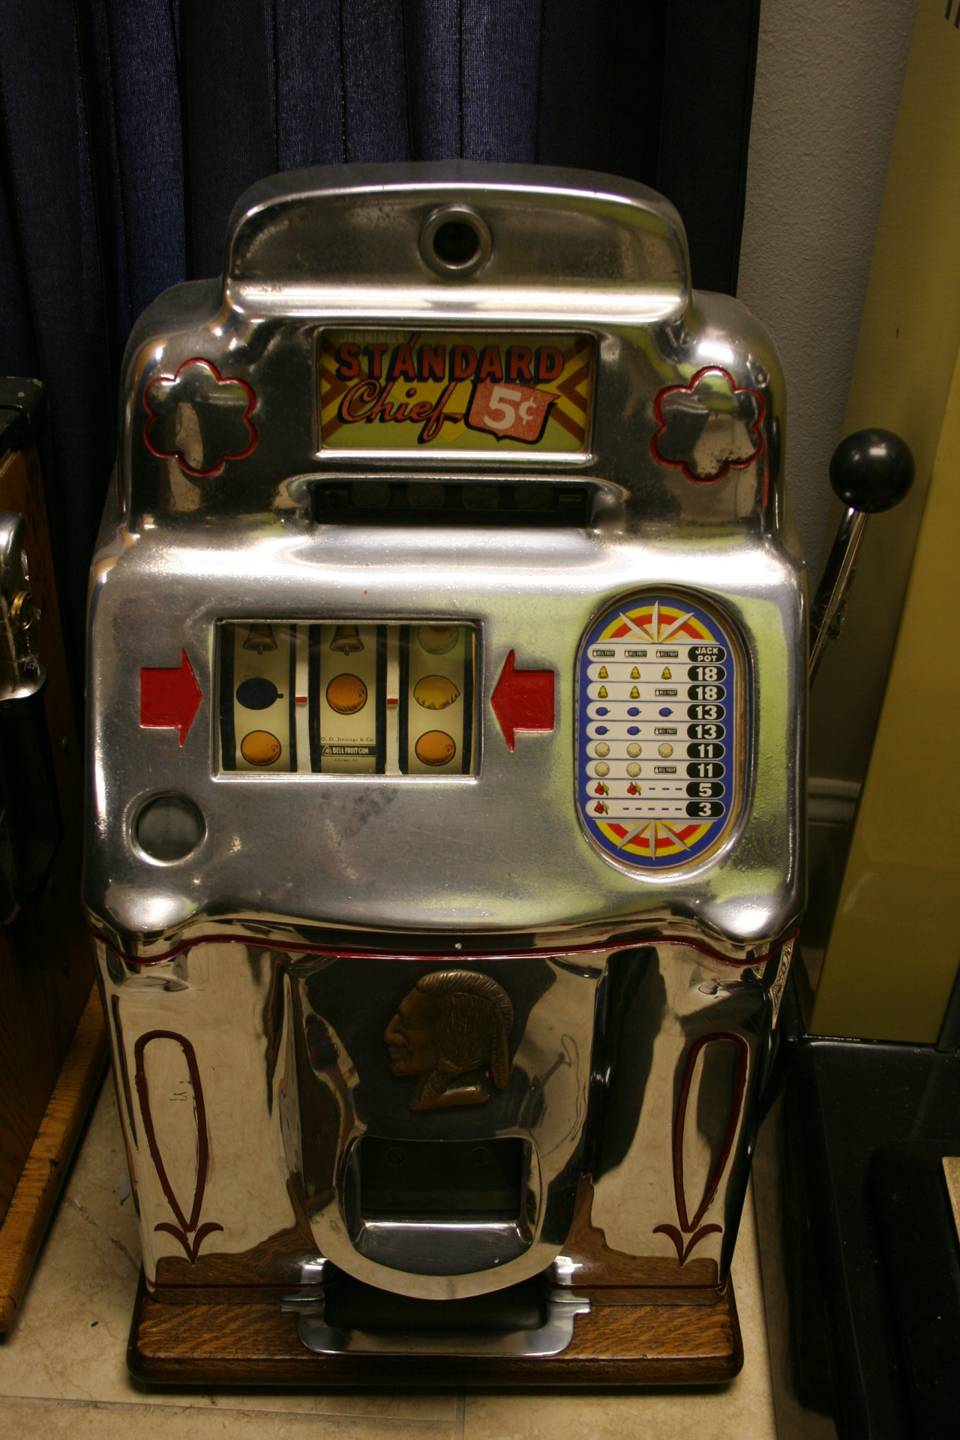 0th Image of a N/A STANDARD CHIEF 5 CENT SLOT MACHINE